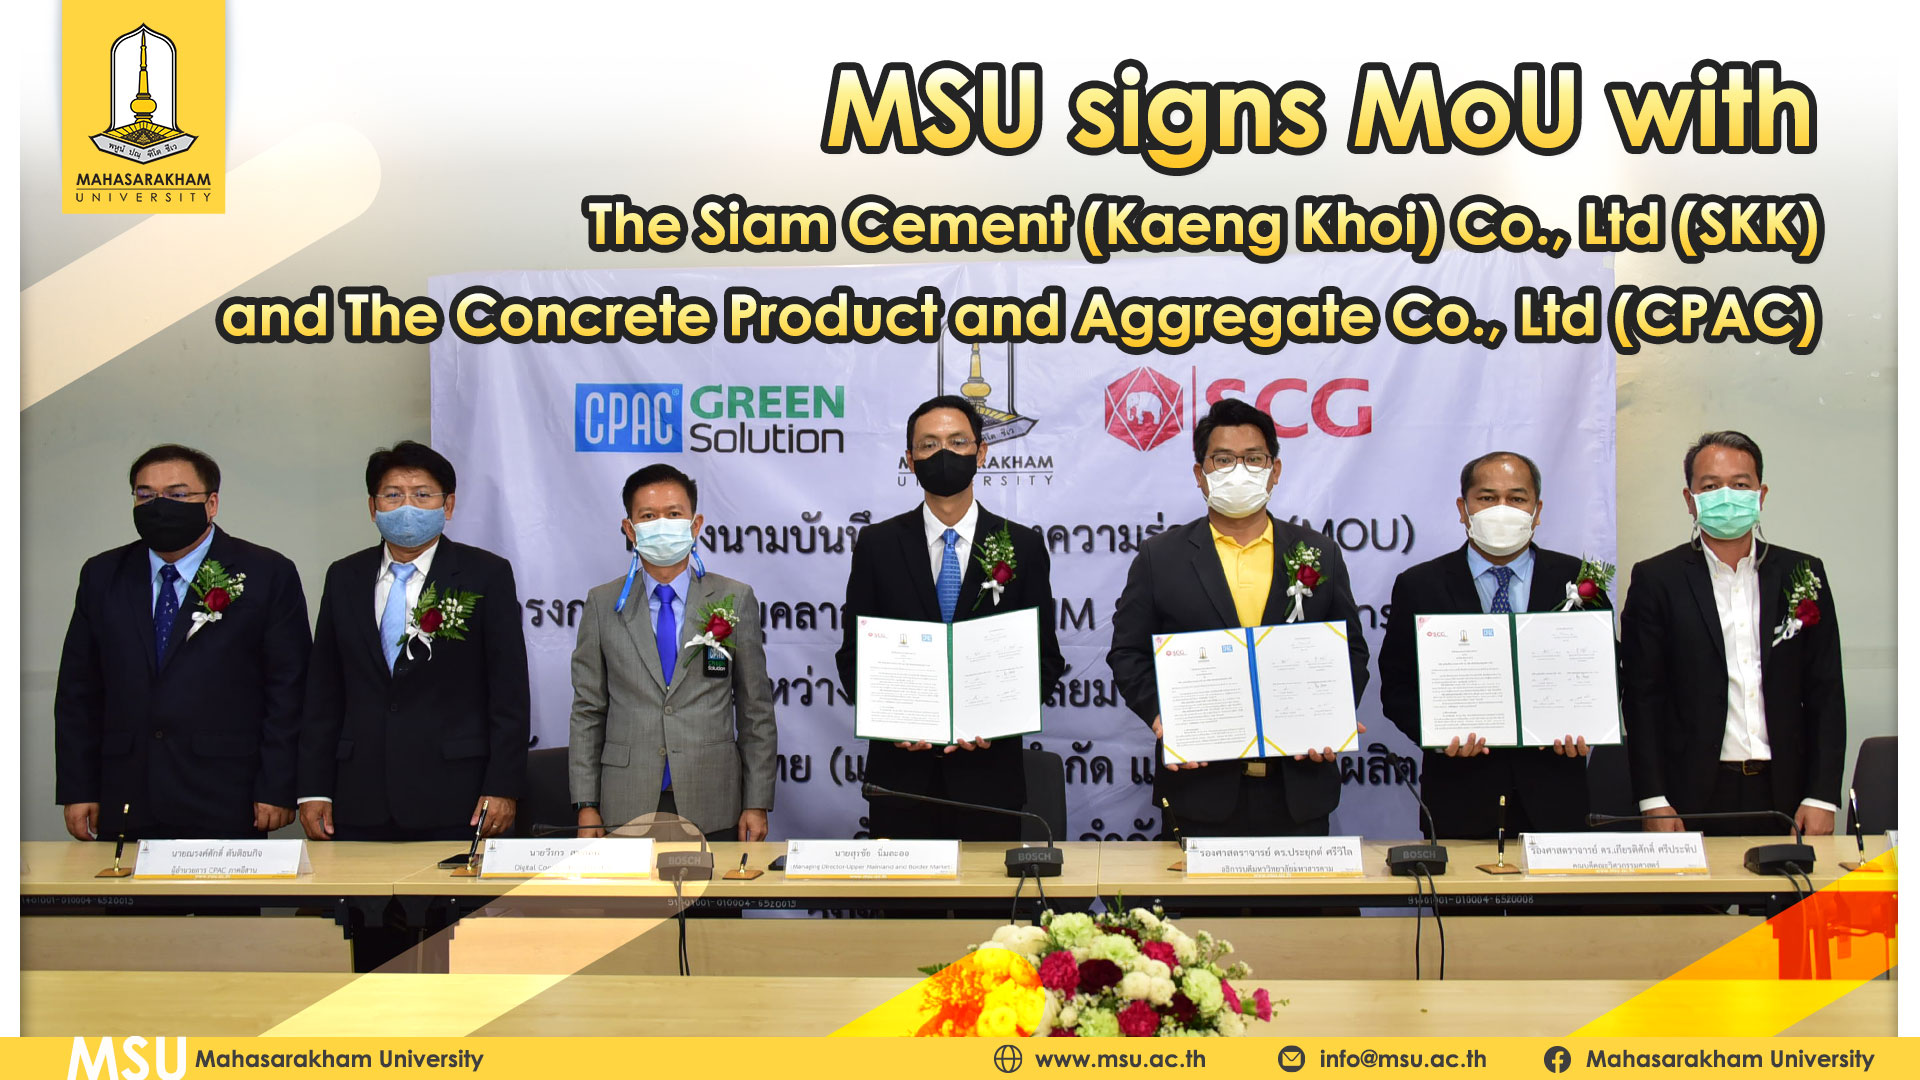 MSU signs MoU with The Siam Cement (Kaeng Khoi) Co., Ltd (SKK) and The Concrete Product and Aggregate Co., Ltd (CPAC)